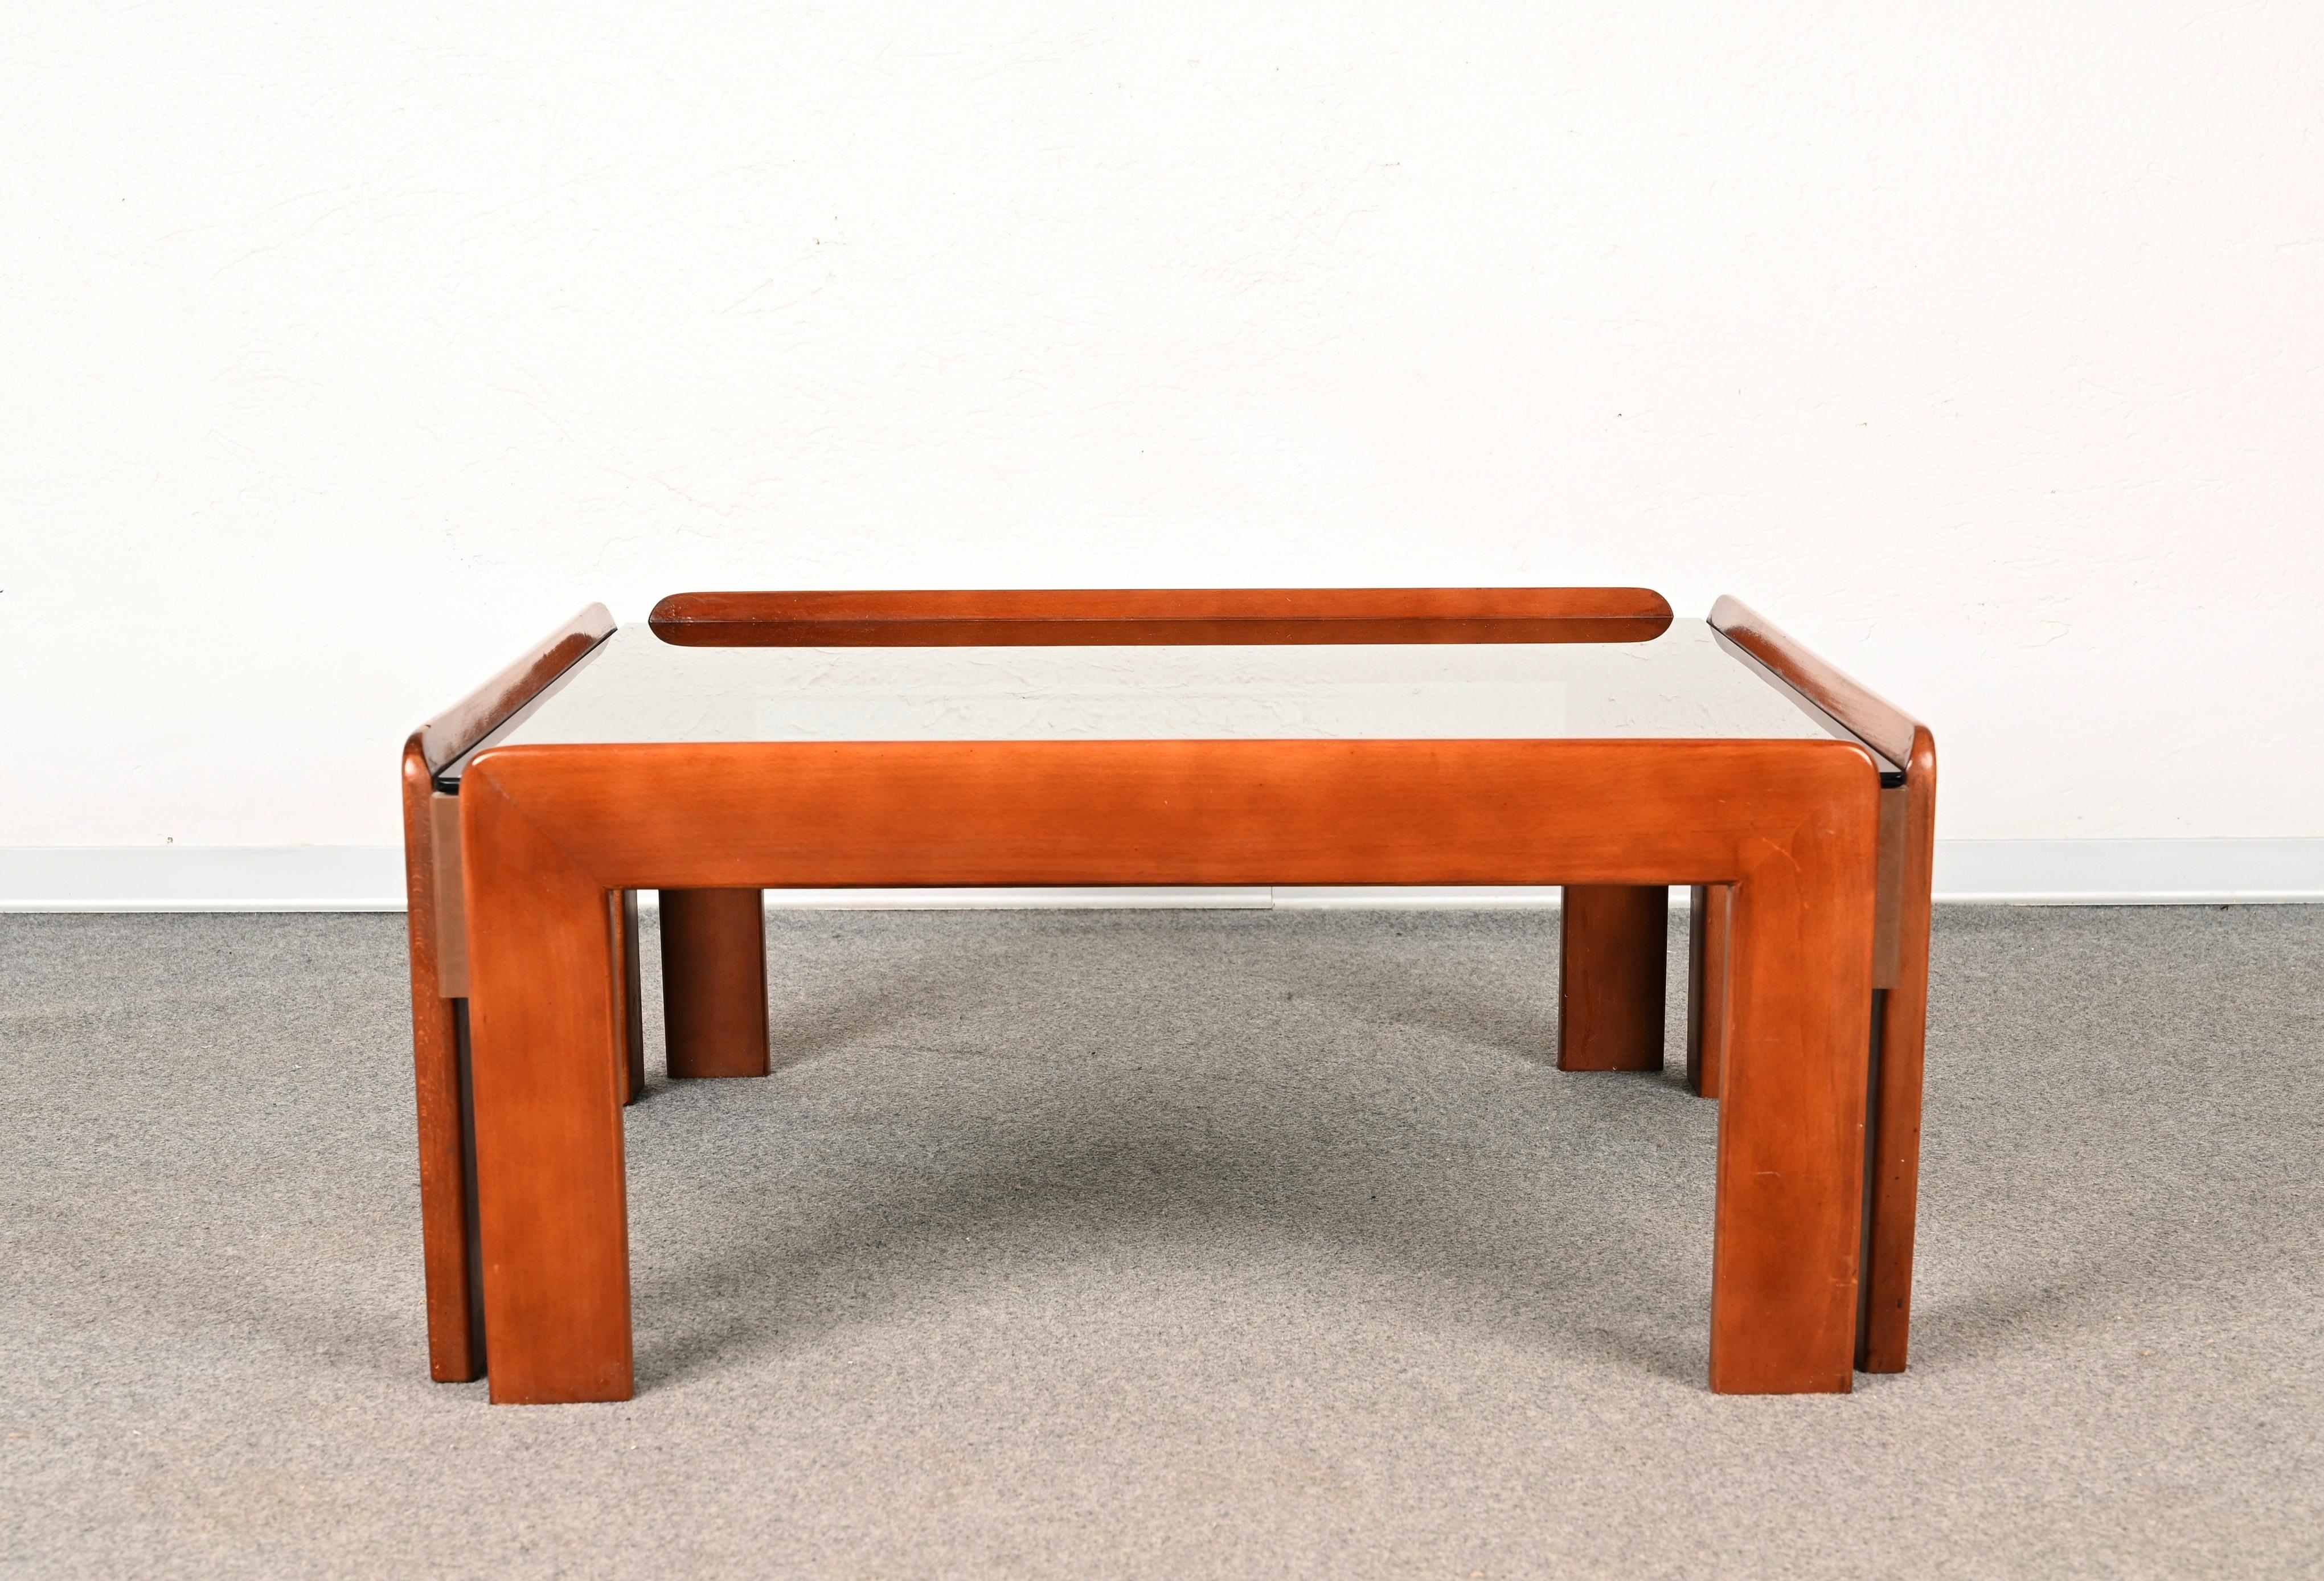 Afra & Tobia Scarpa Midcentury Wood Squared Italian Coffee Table, 1960s For Sale 1